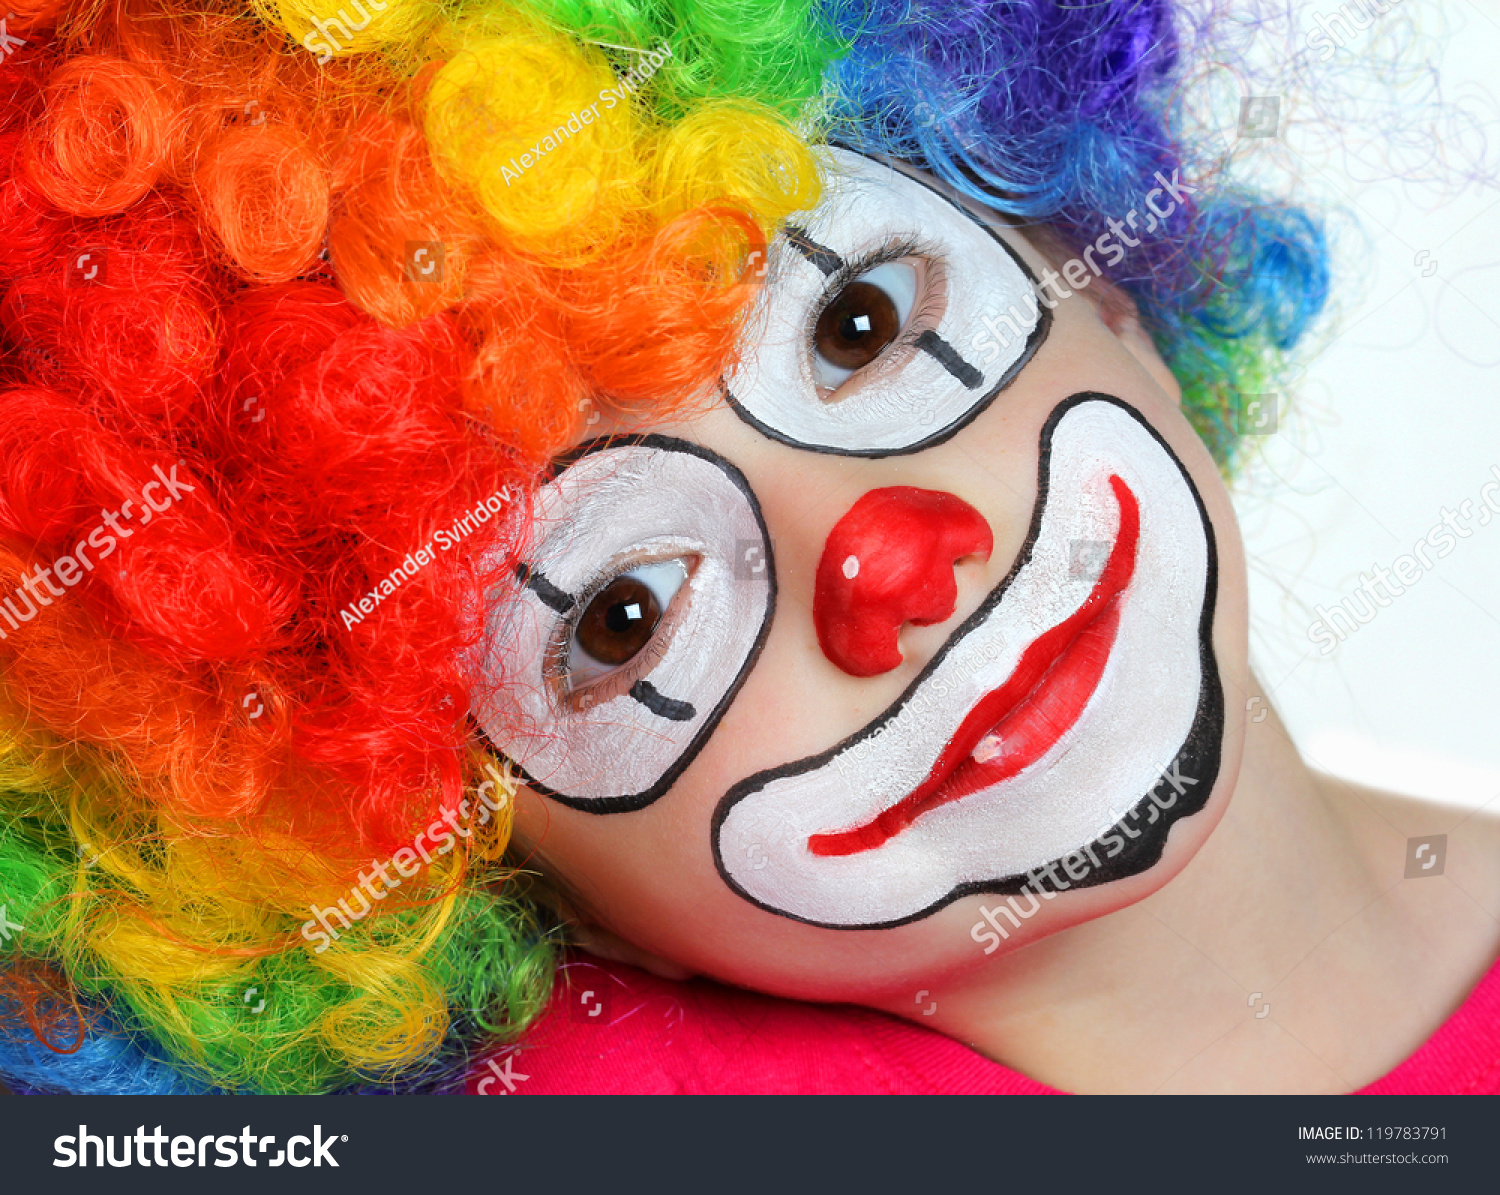 Pretty girl with face painting of a clown #119783791